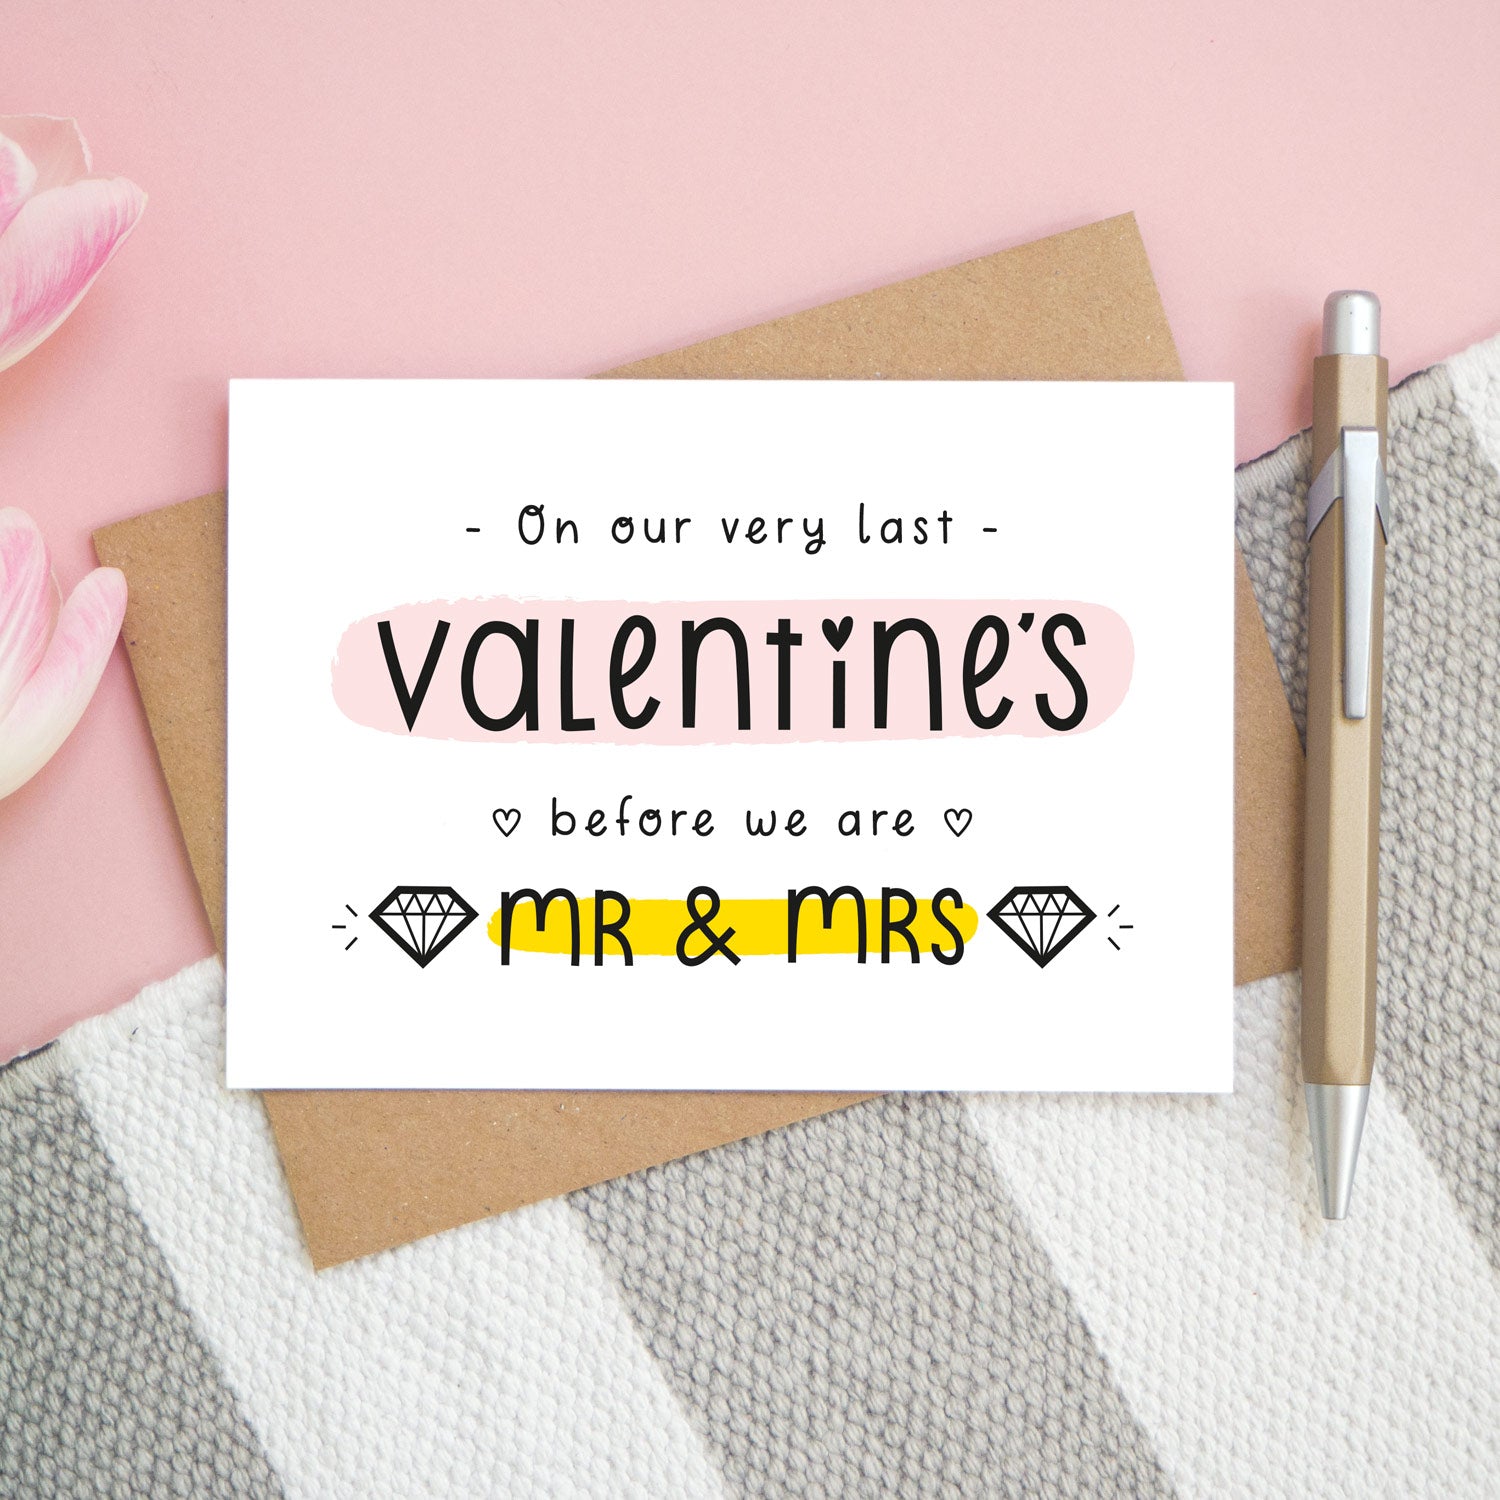 A last anniversary or Valentine’s card photographed on a pink background with pink tulip flowers, a gold pen and a grey and white stripe rug. This image shows the last valentine’s option with the Mr & Mrs wording. The text is black and there are pops of yellow and pink behind key words.